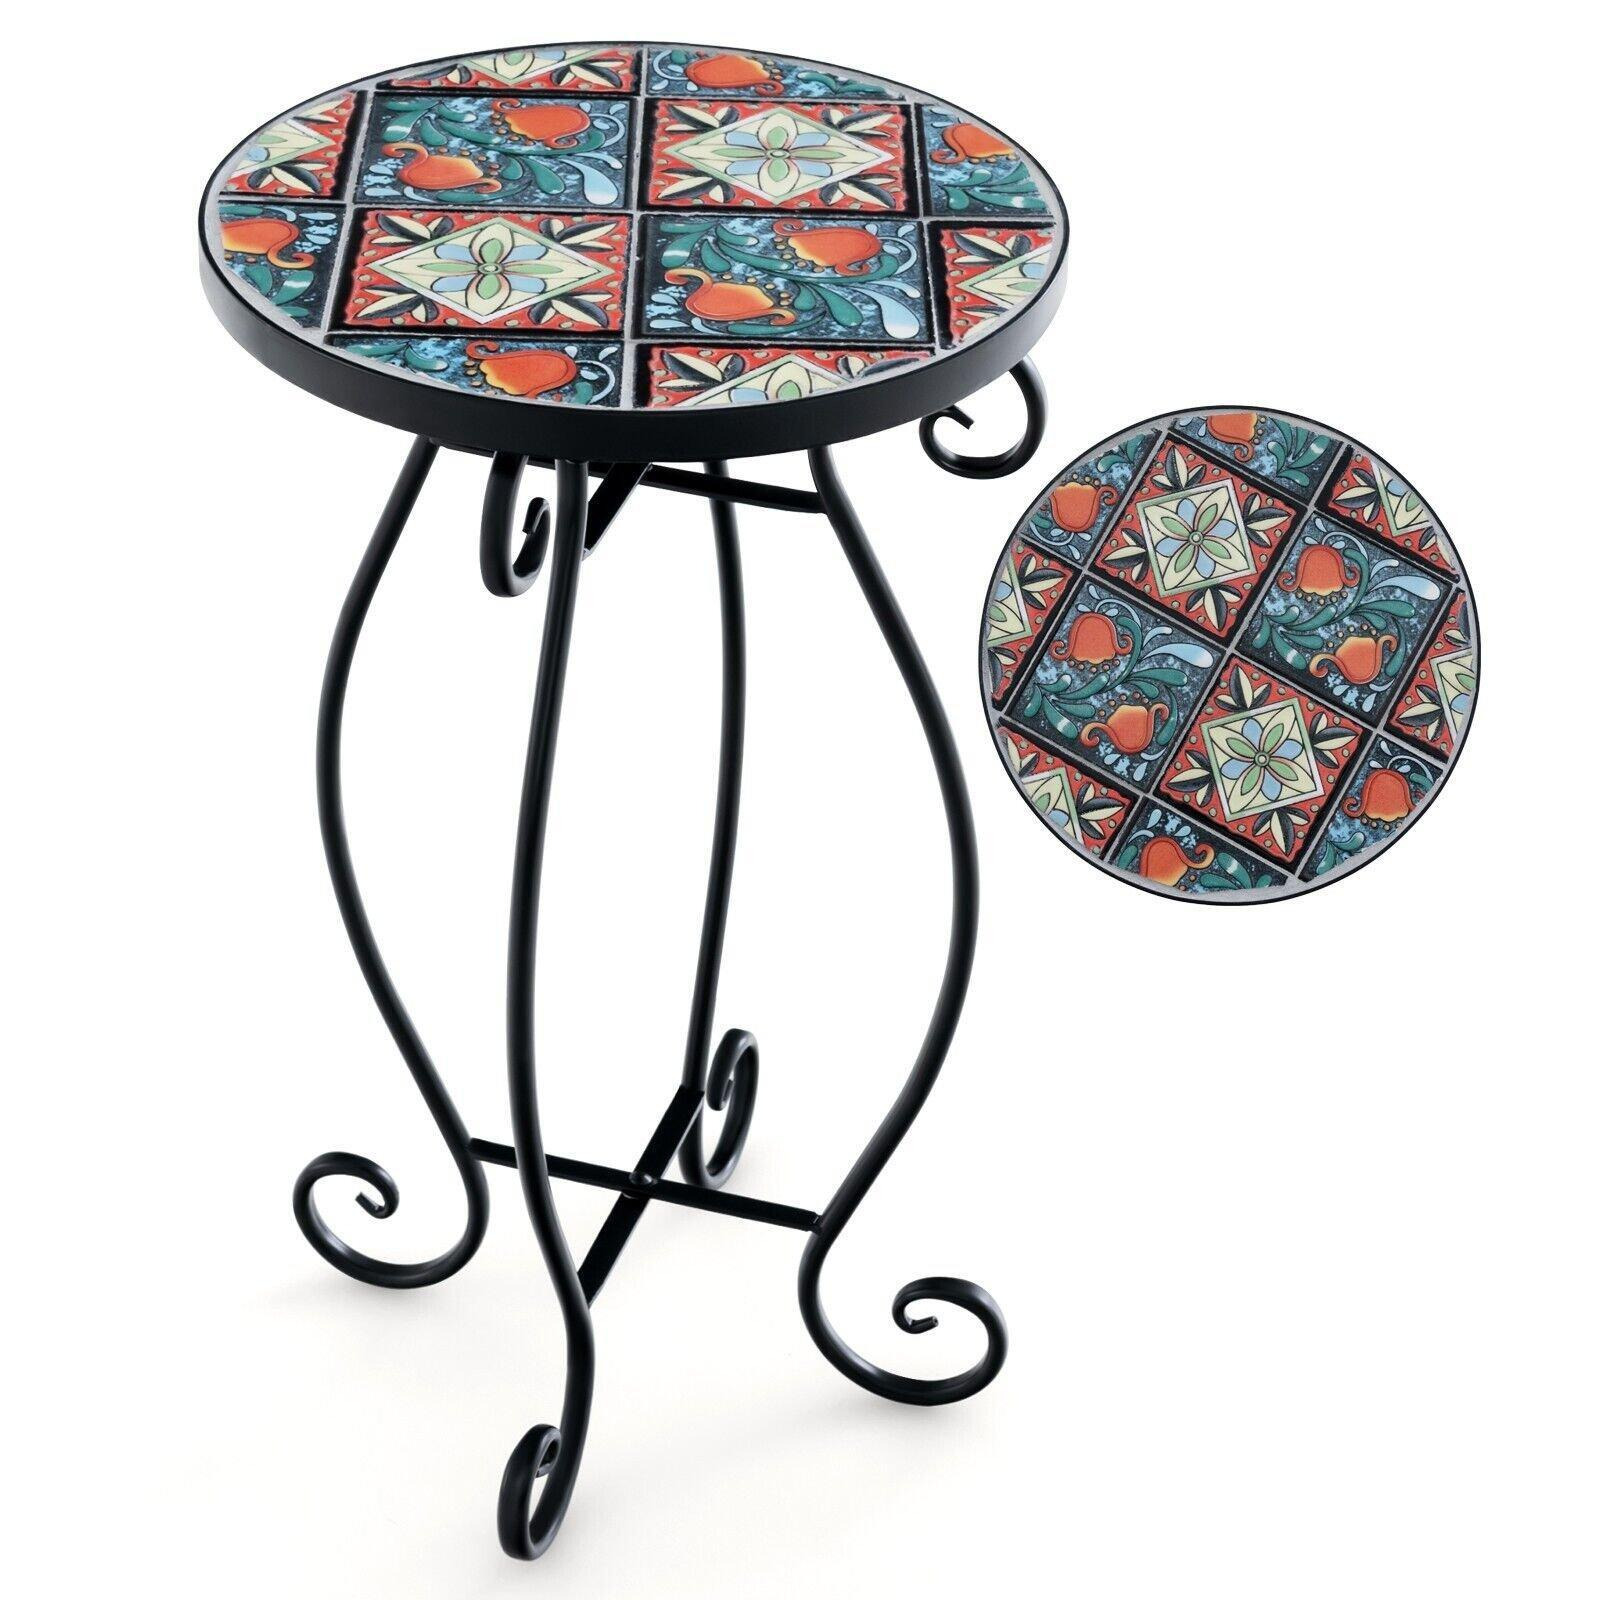 Mosaic Outdoor Side Table Round End Table Weather Resistant Ceramic Tabletop - image 1